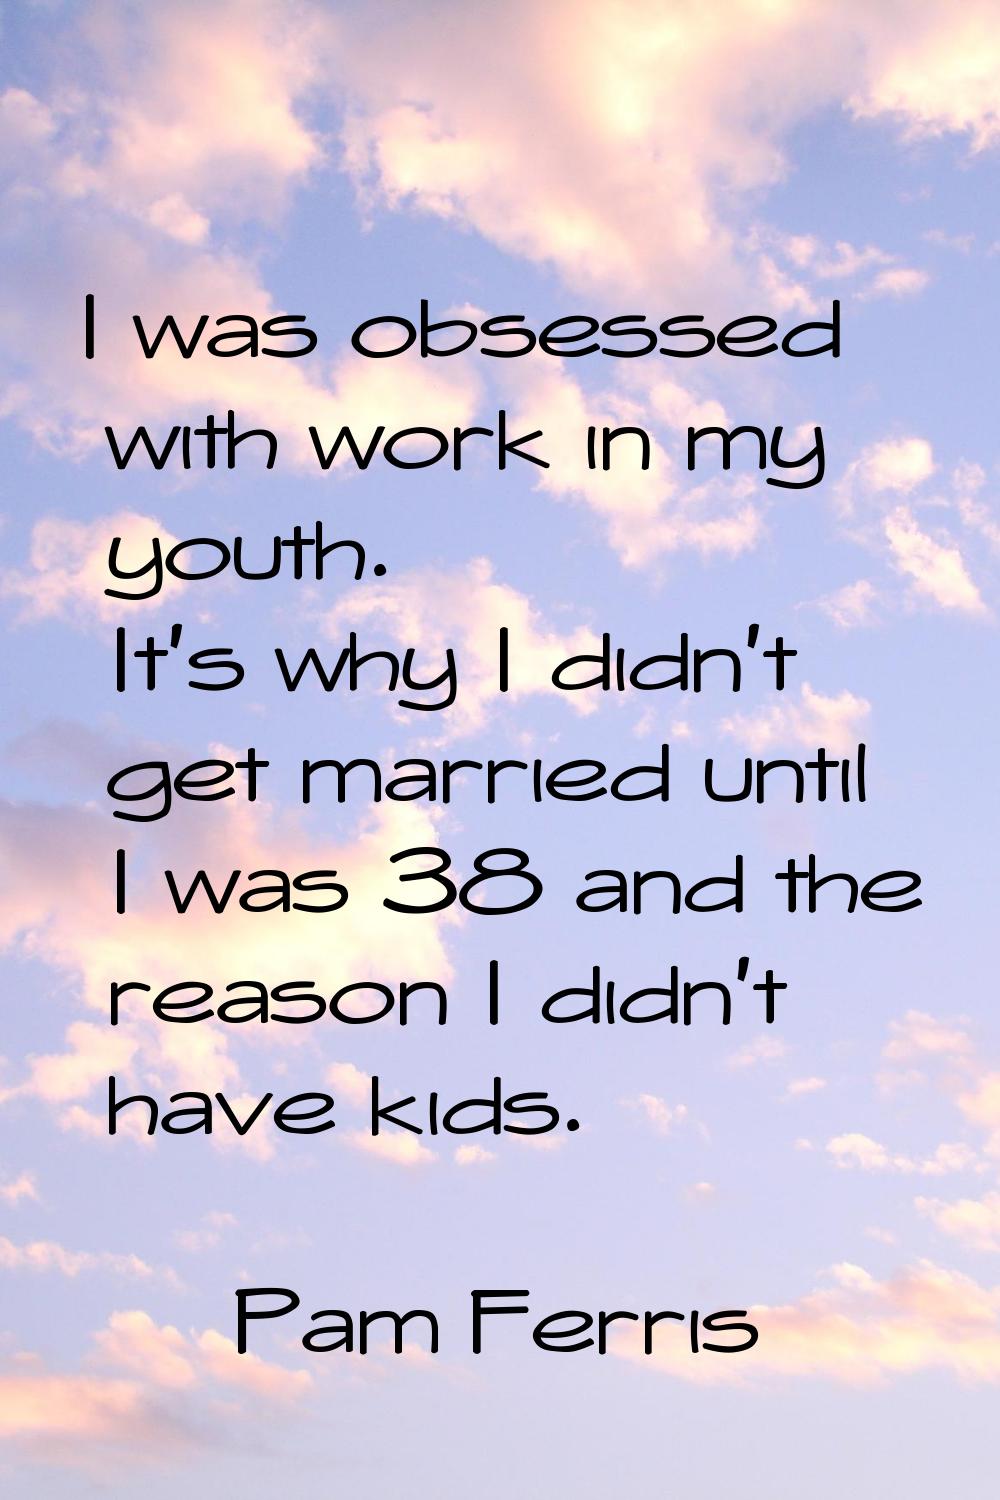 I was obsessed with work in my youth. It's why I didn't get married until I was 38 and the reason I